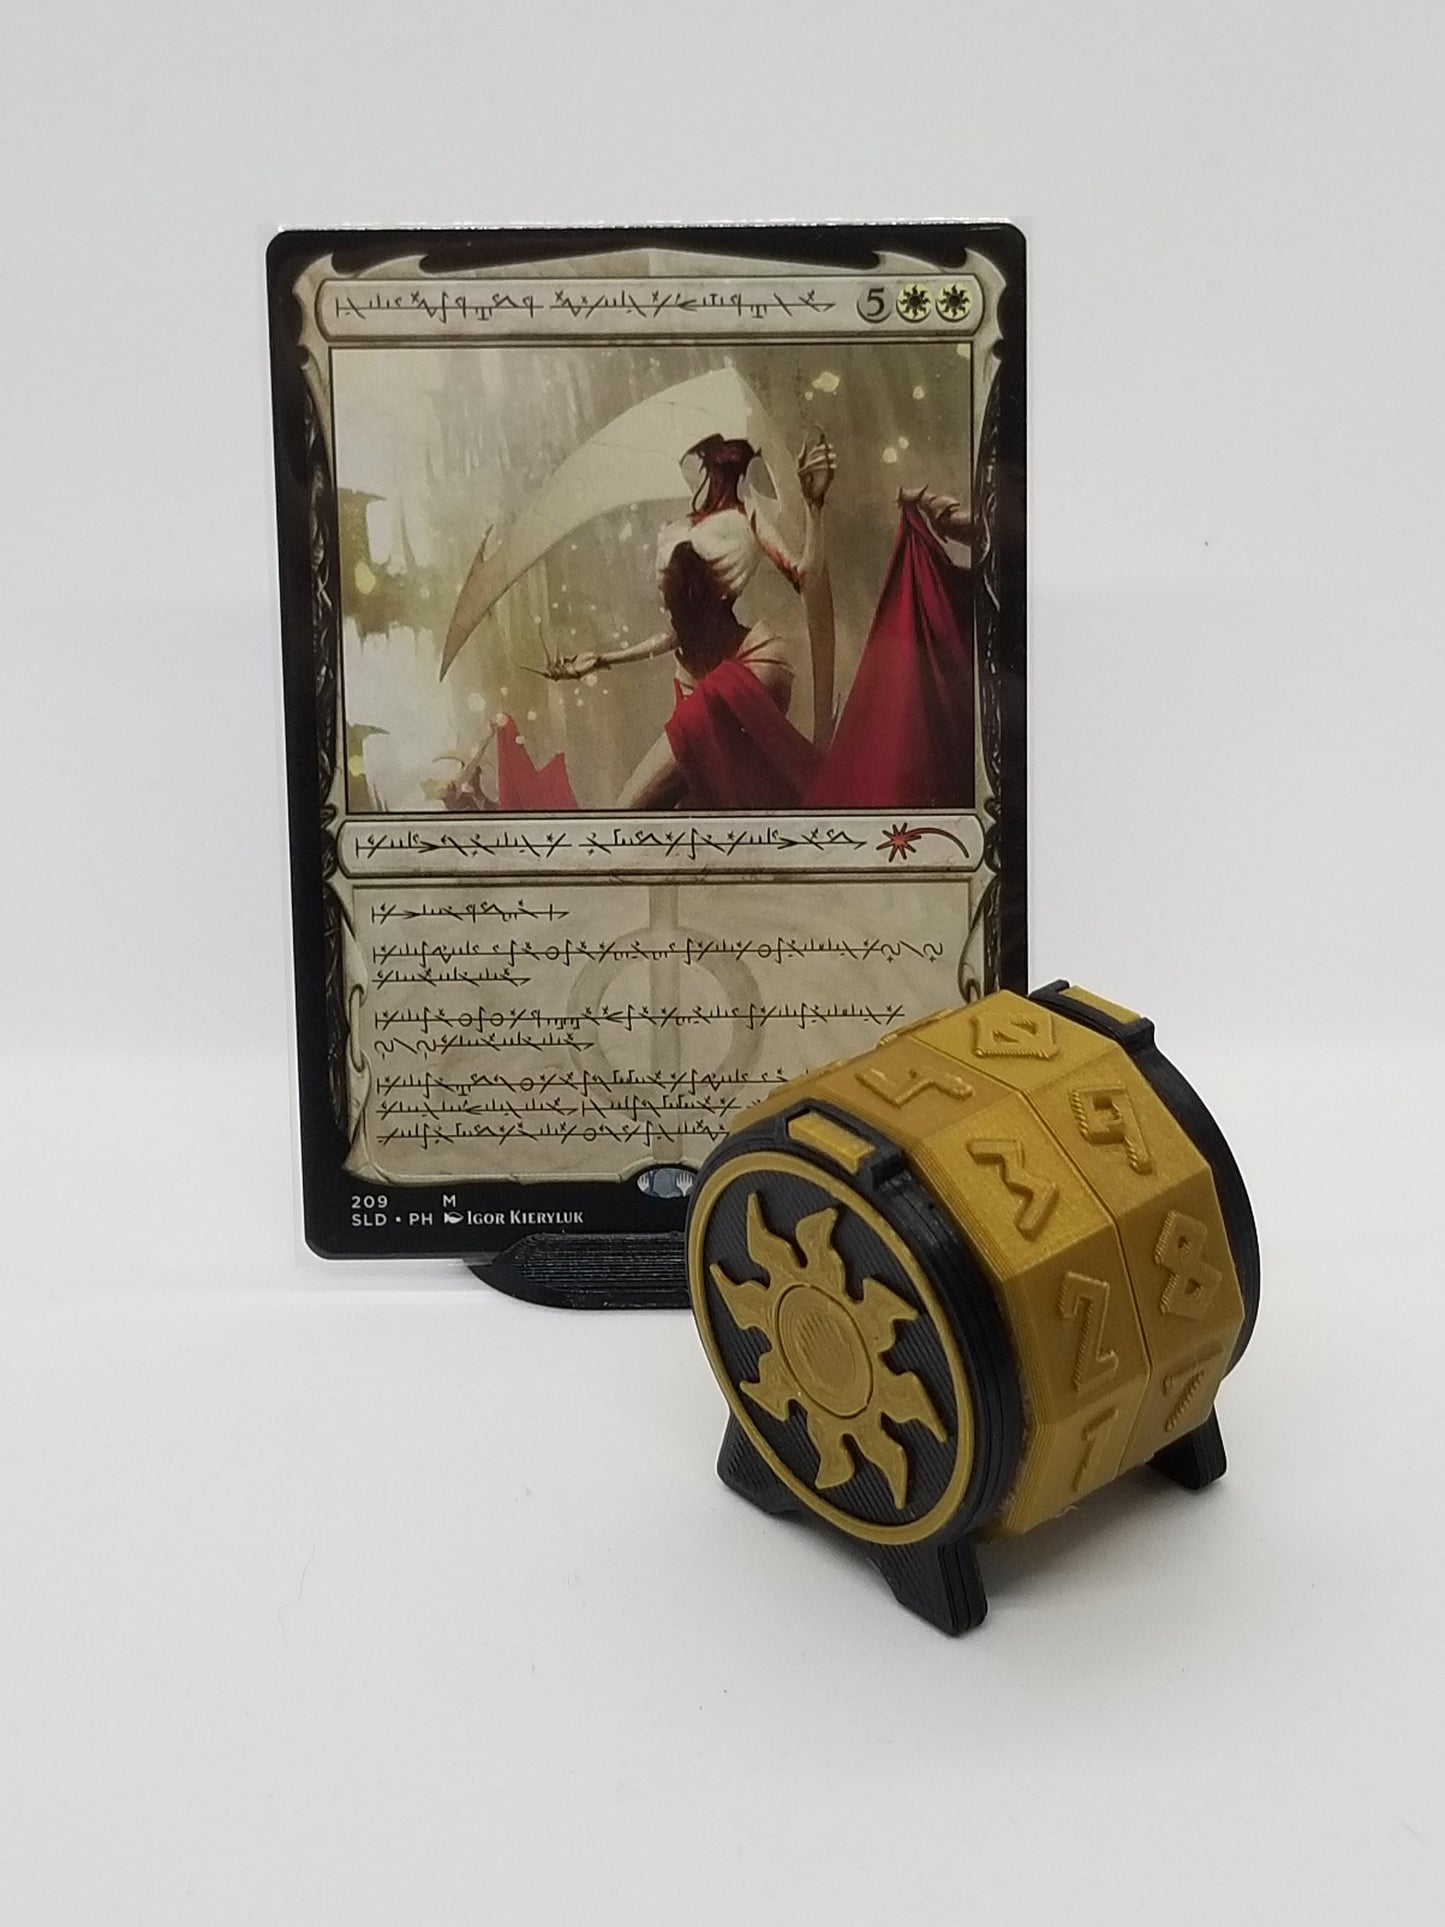 MTG Spindown Life Counters - Mana colors - Anthology - Ratcheting mechanism - Snoo3d